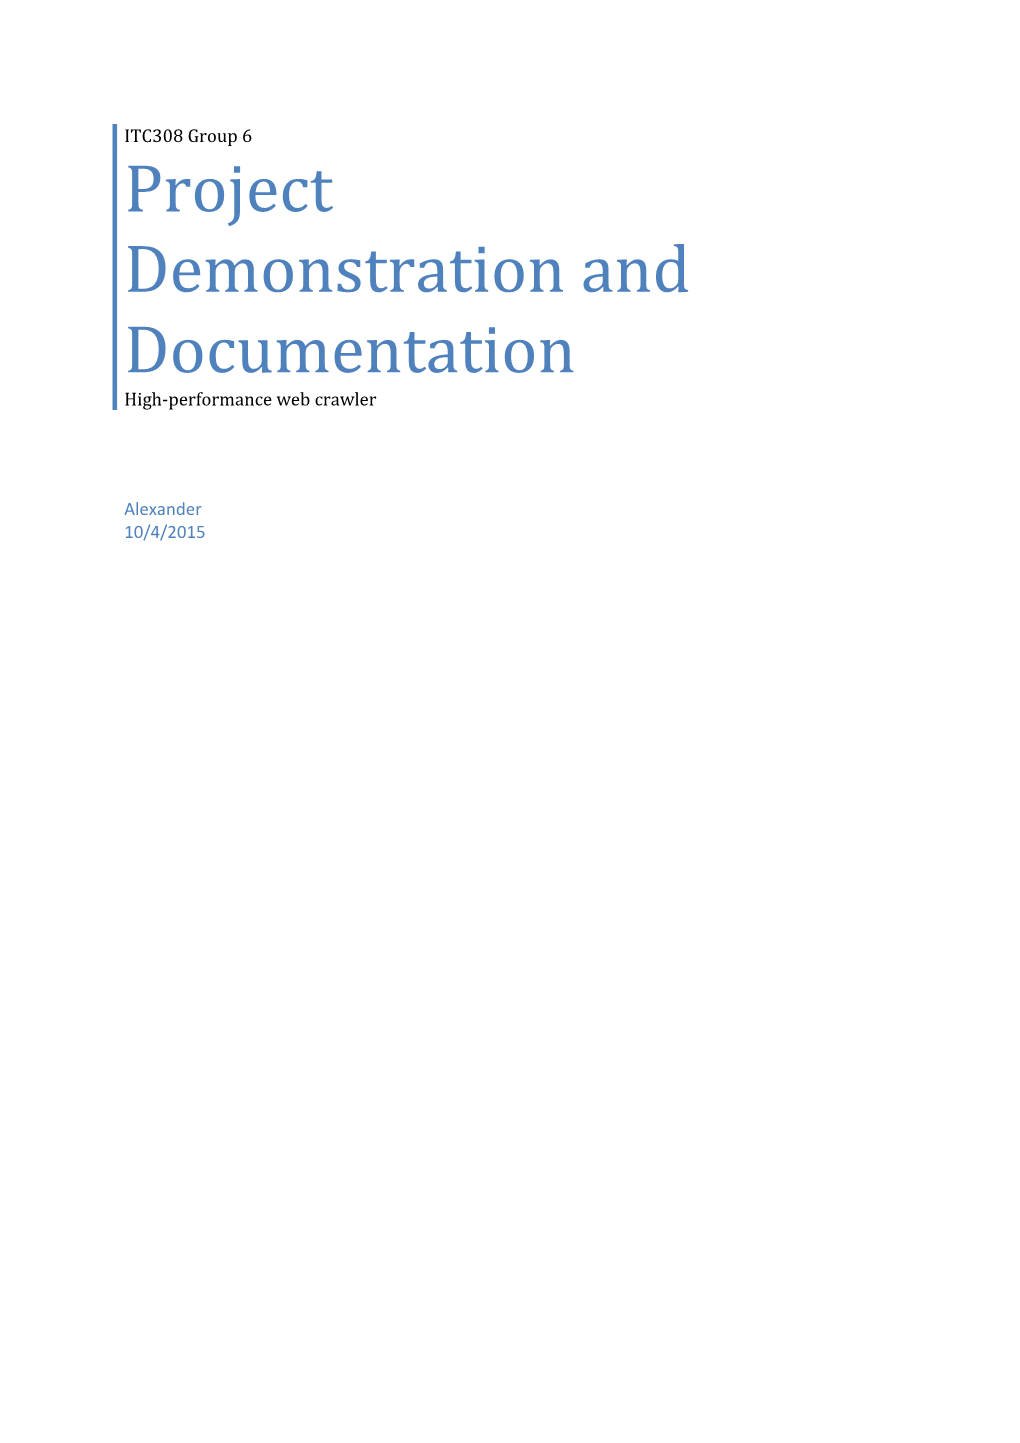 Project Demonstration and Documentation